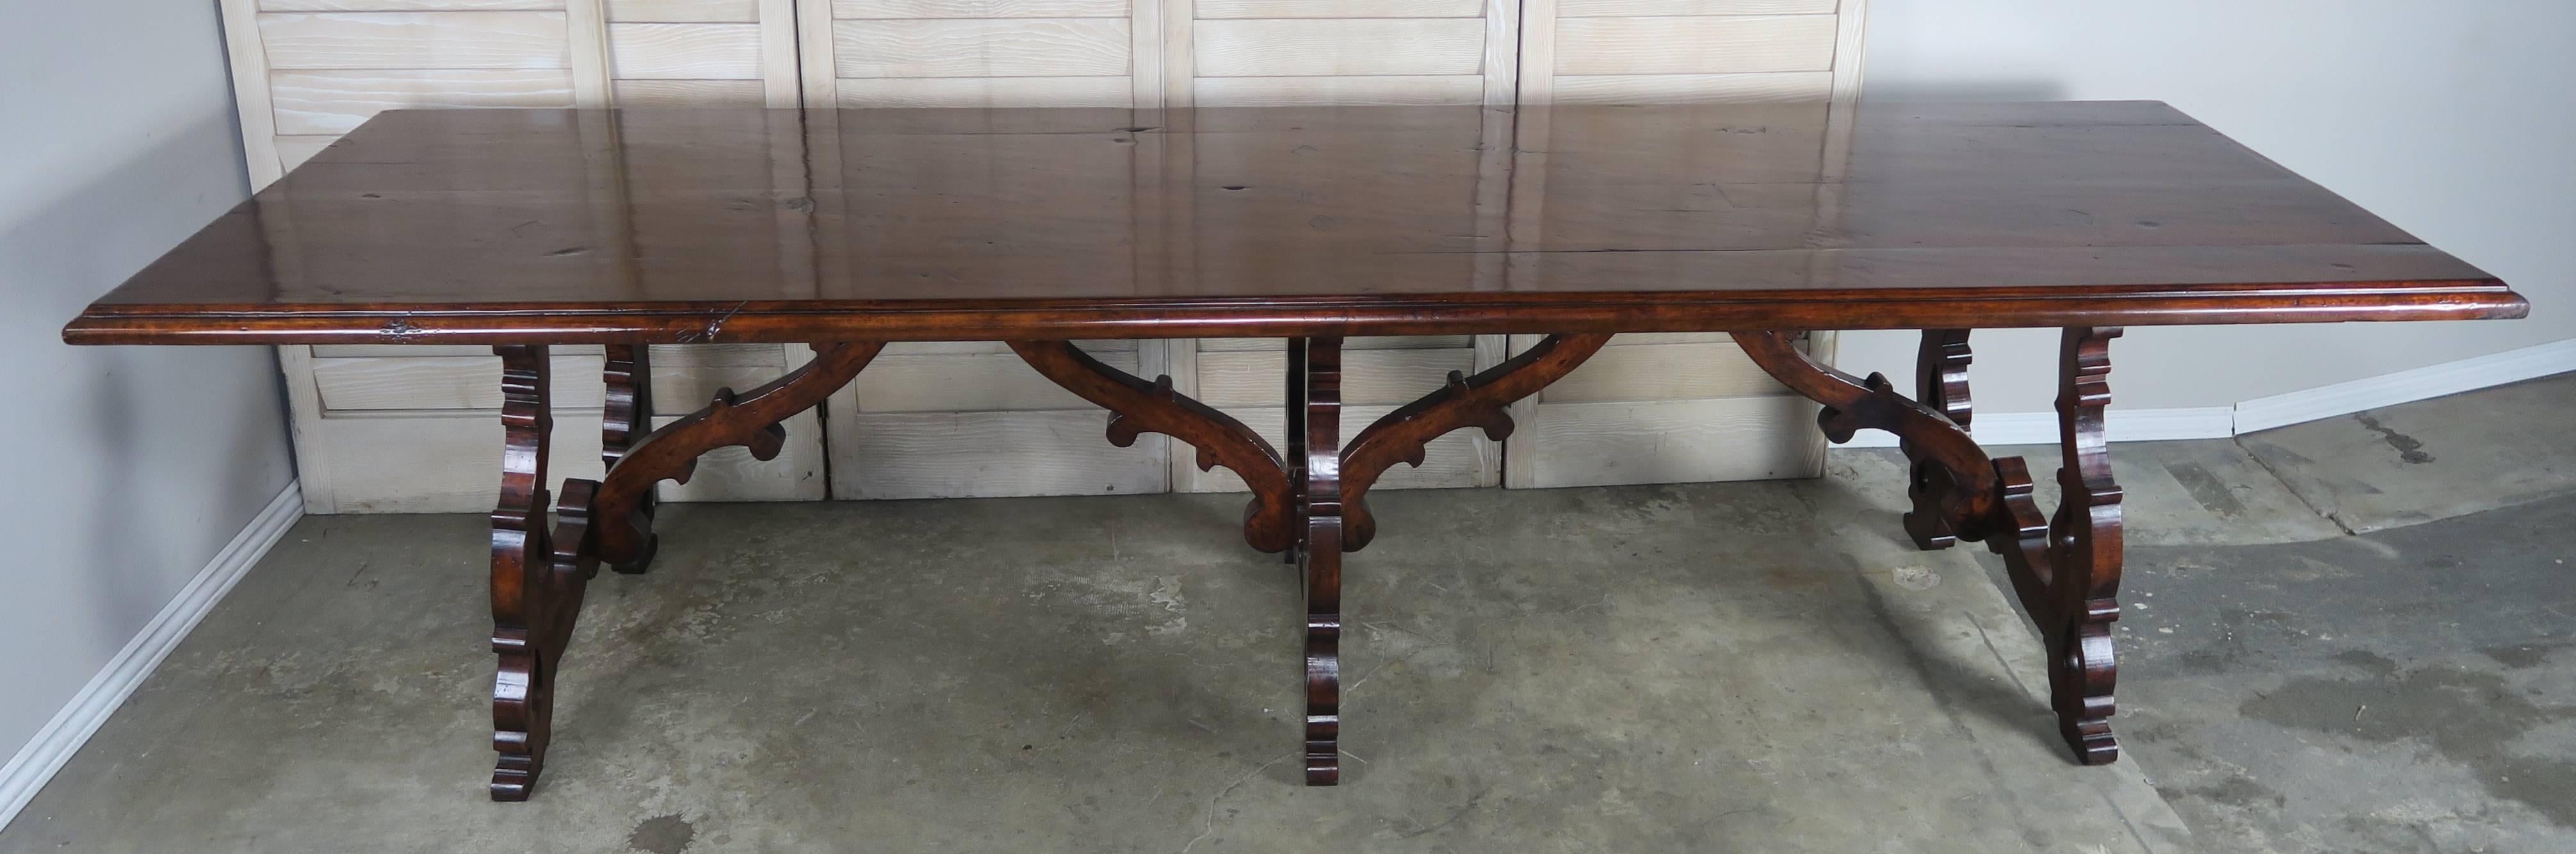 Unique Spanish Baroque style refractory dining table with a rectangular top supported by three lyre shaped bases ending in six legs. Two wooden stretchers gracefully join the three lyre shaped sections. Nice patina.